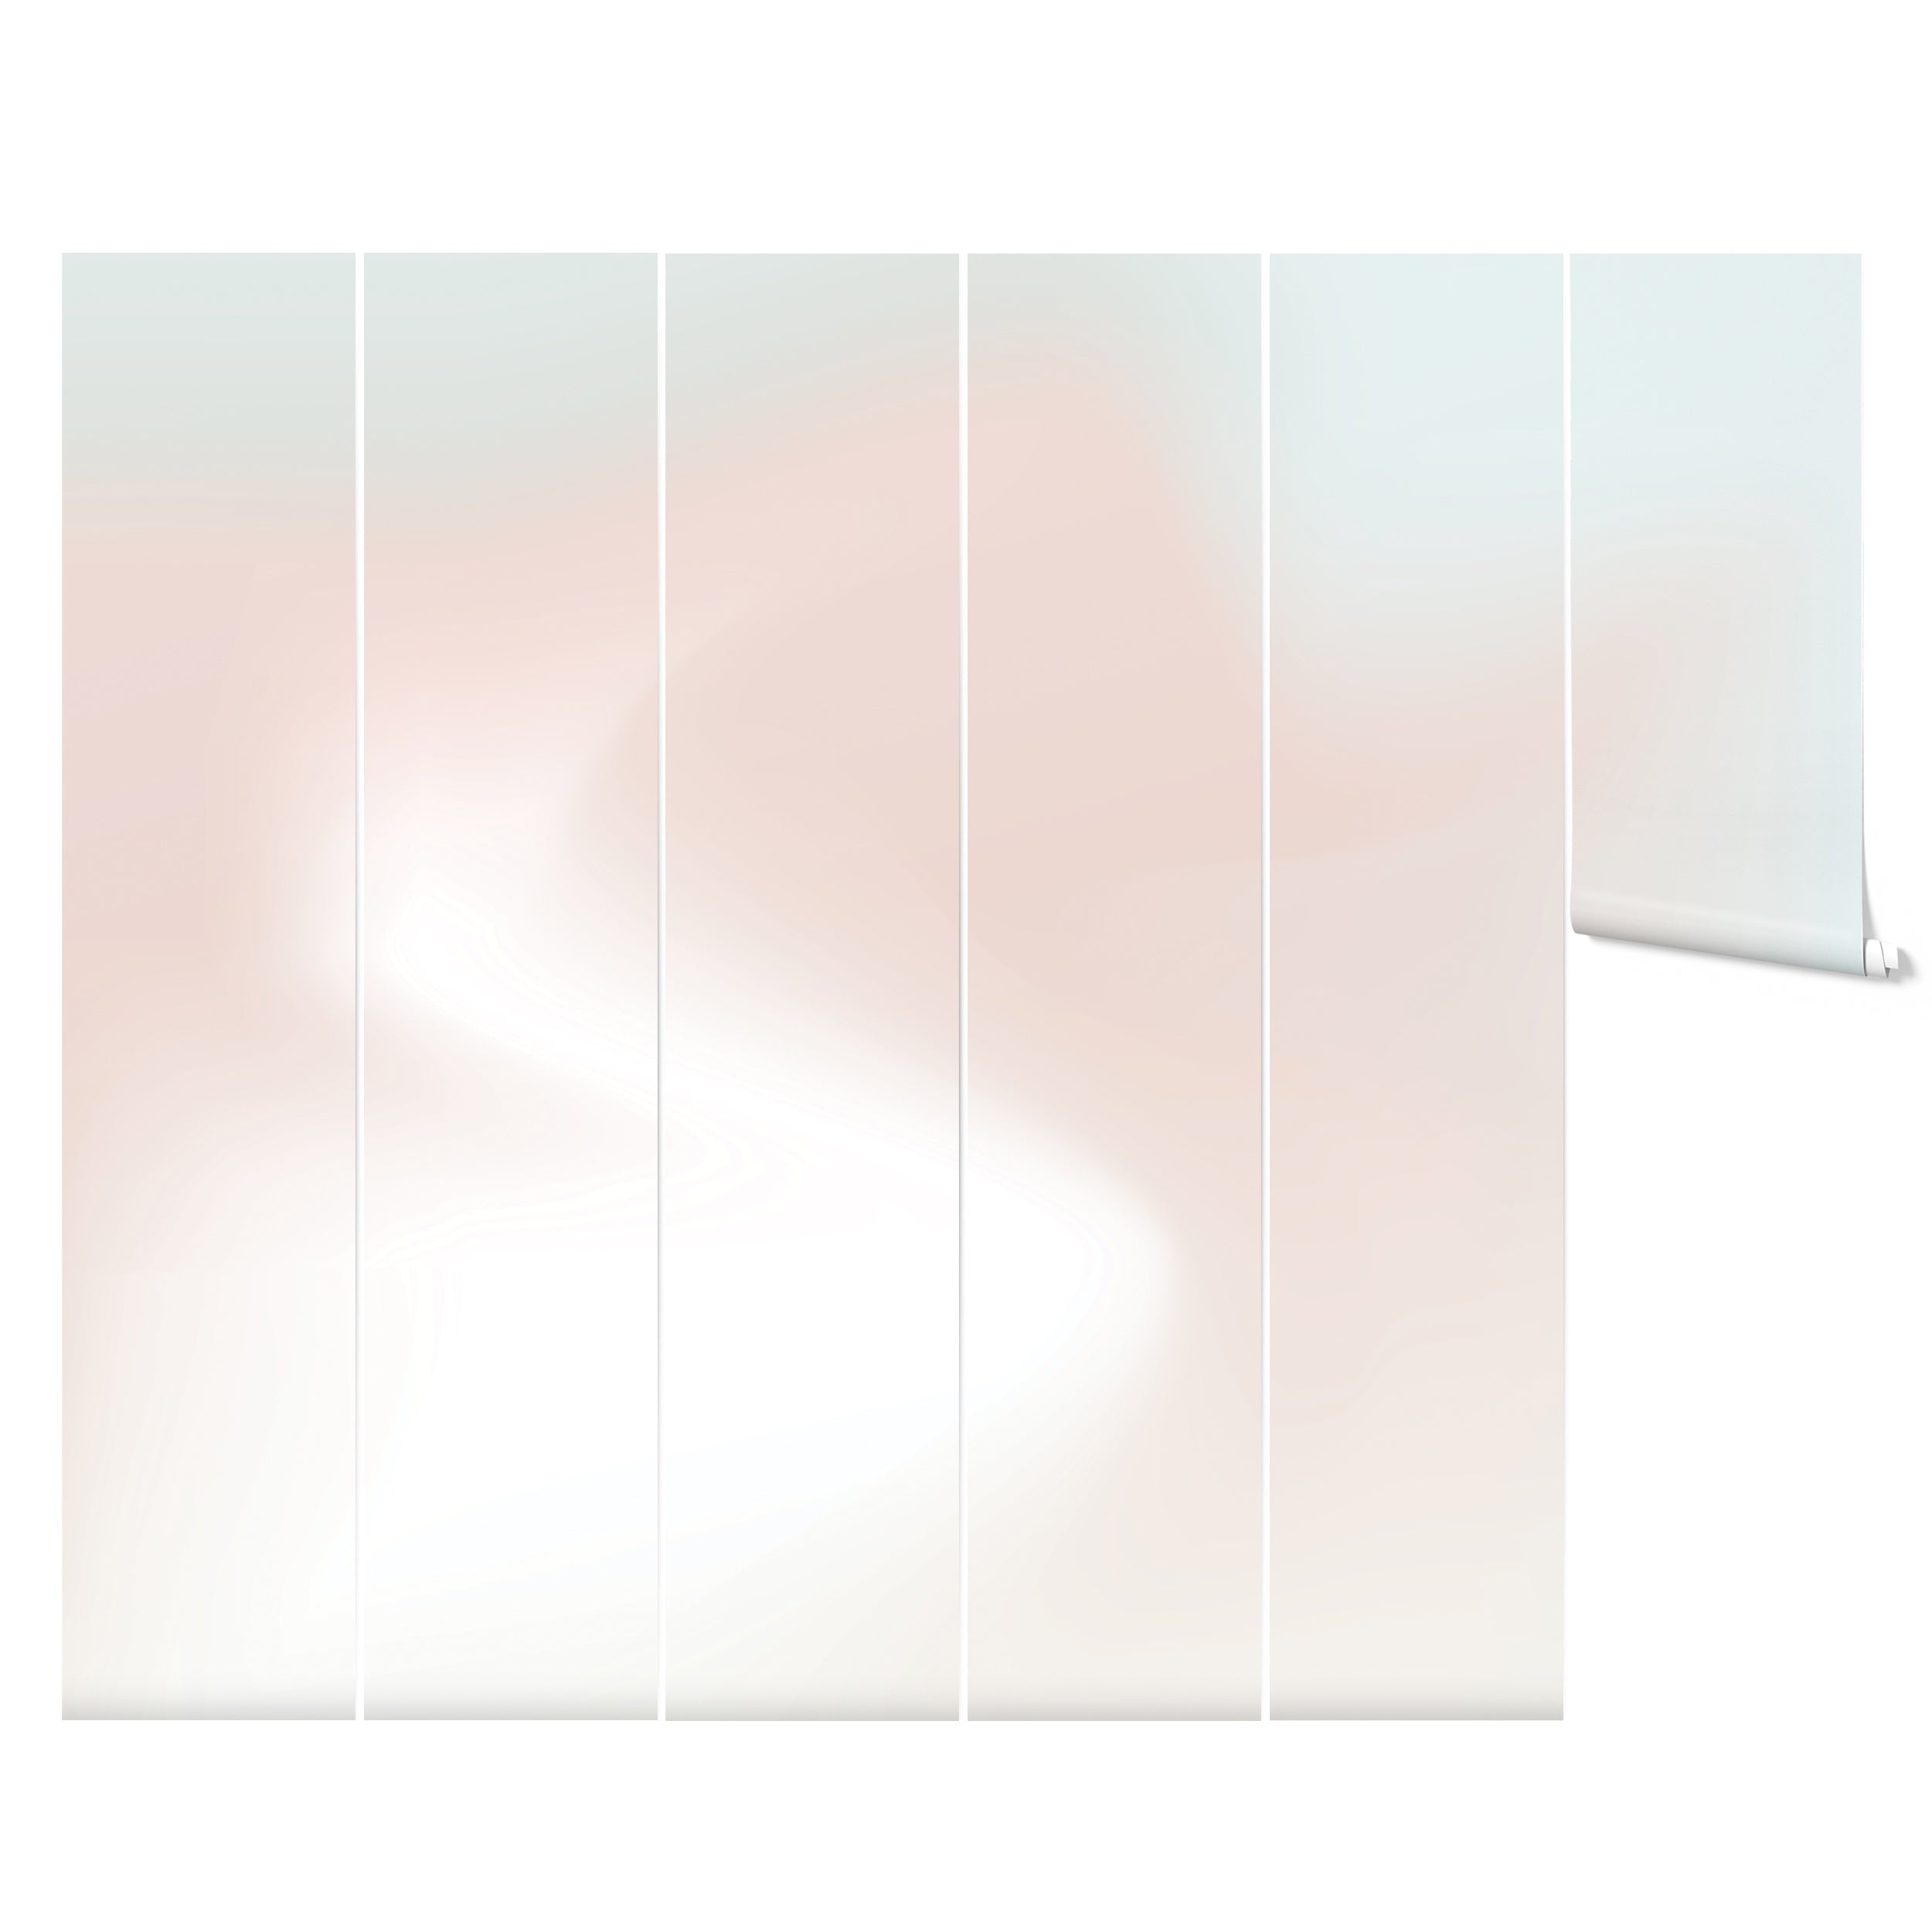 Mockup of the Nursery Wallpaper Mural in soft gradient colors displayed on six vertical panels, showcasing the seamless transition from blues to pinks.